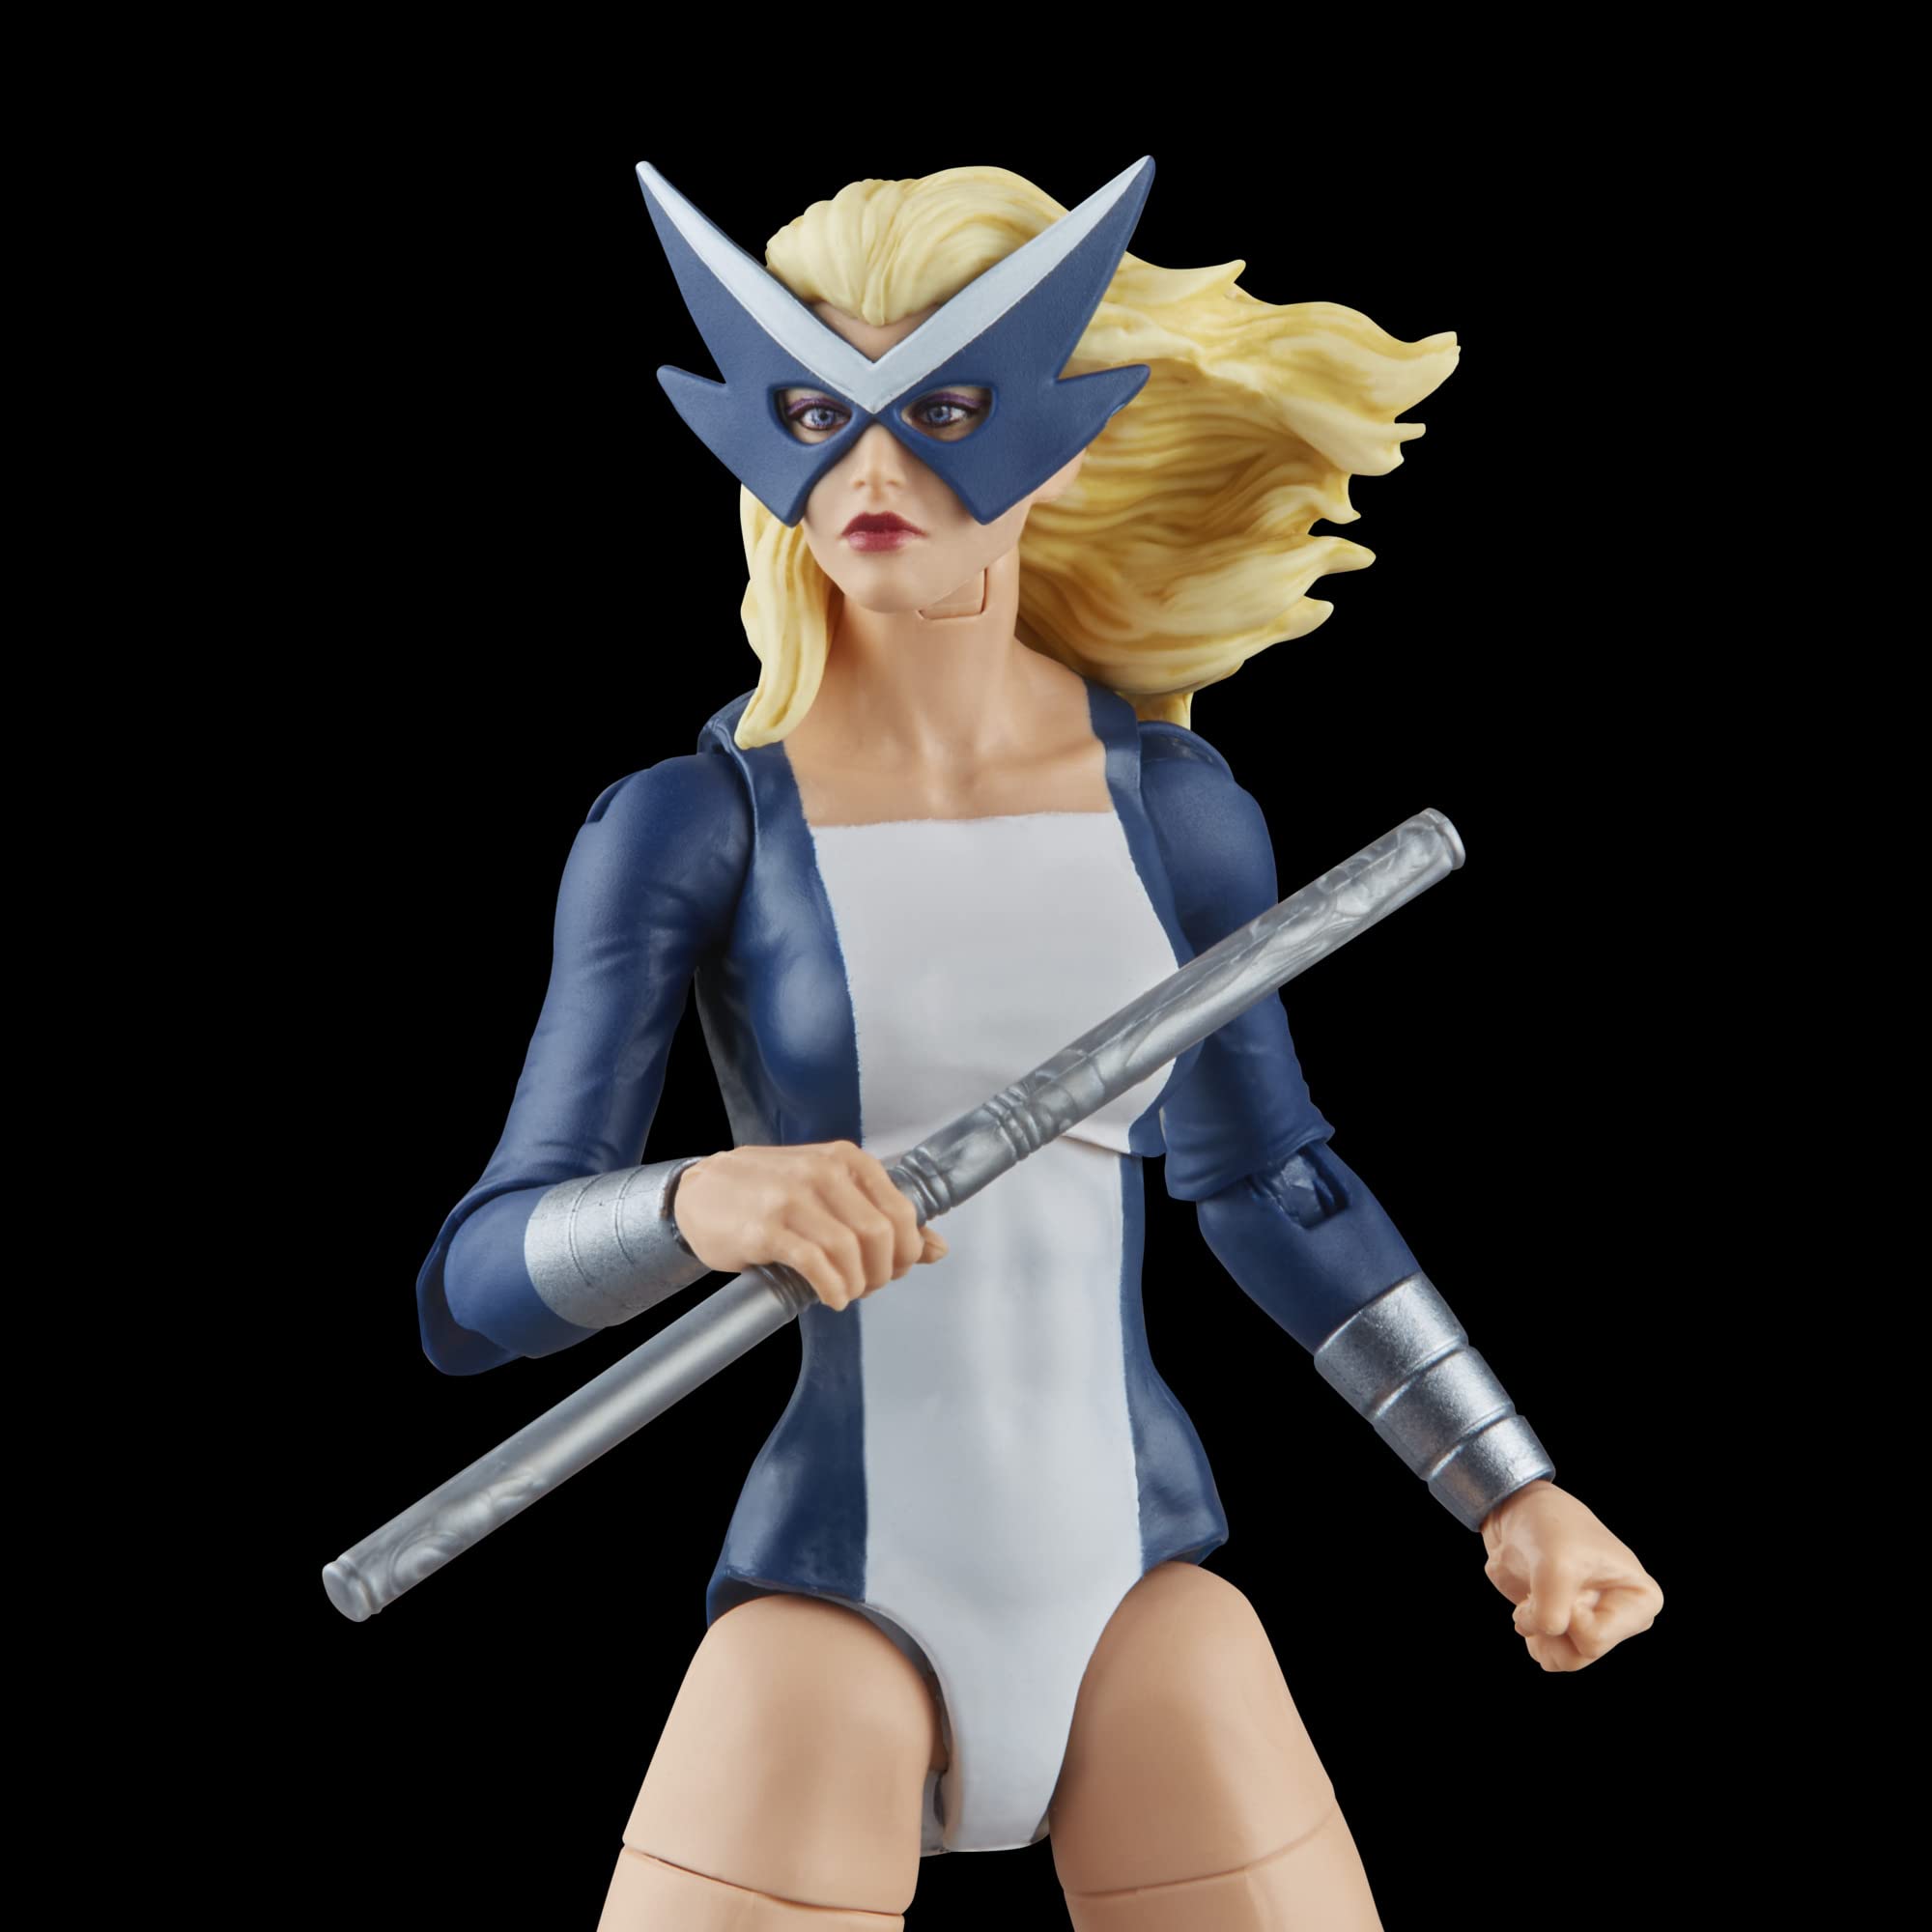 Marvel Legends Series The West Coast Avengers Collection, 5 Comics-Inspired Collectible 6-Inch Action Figures (Amazon Exclusive)